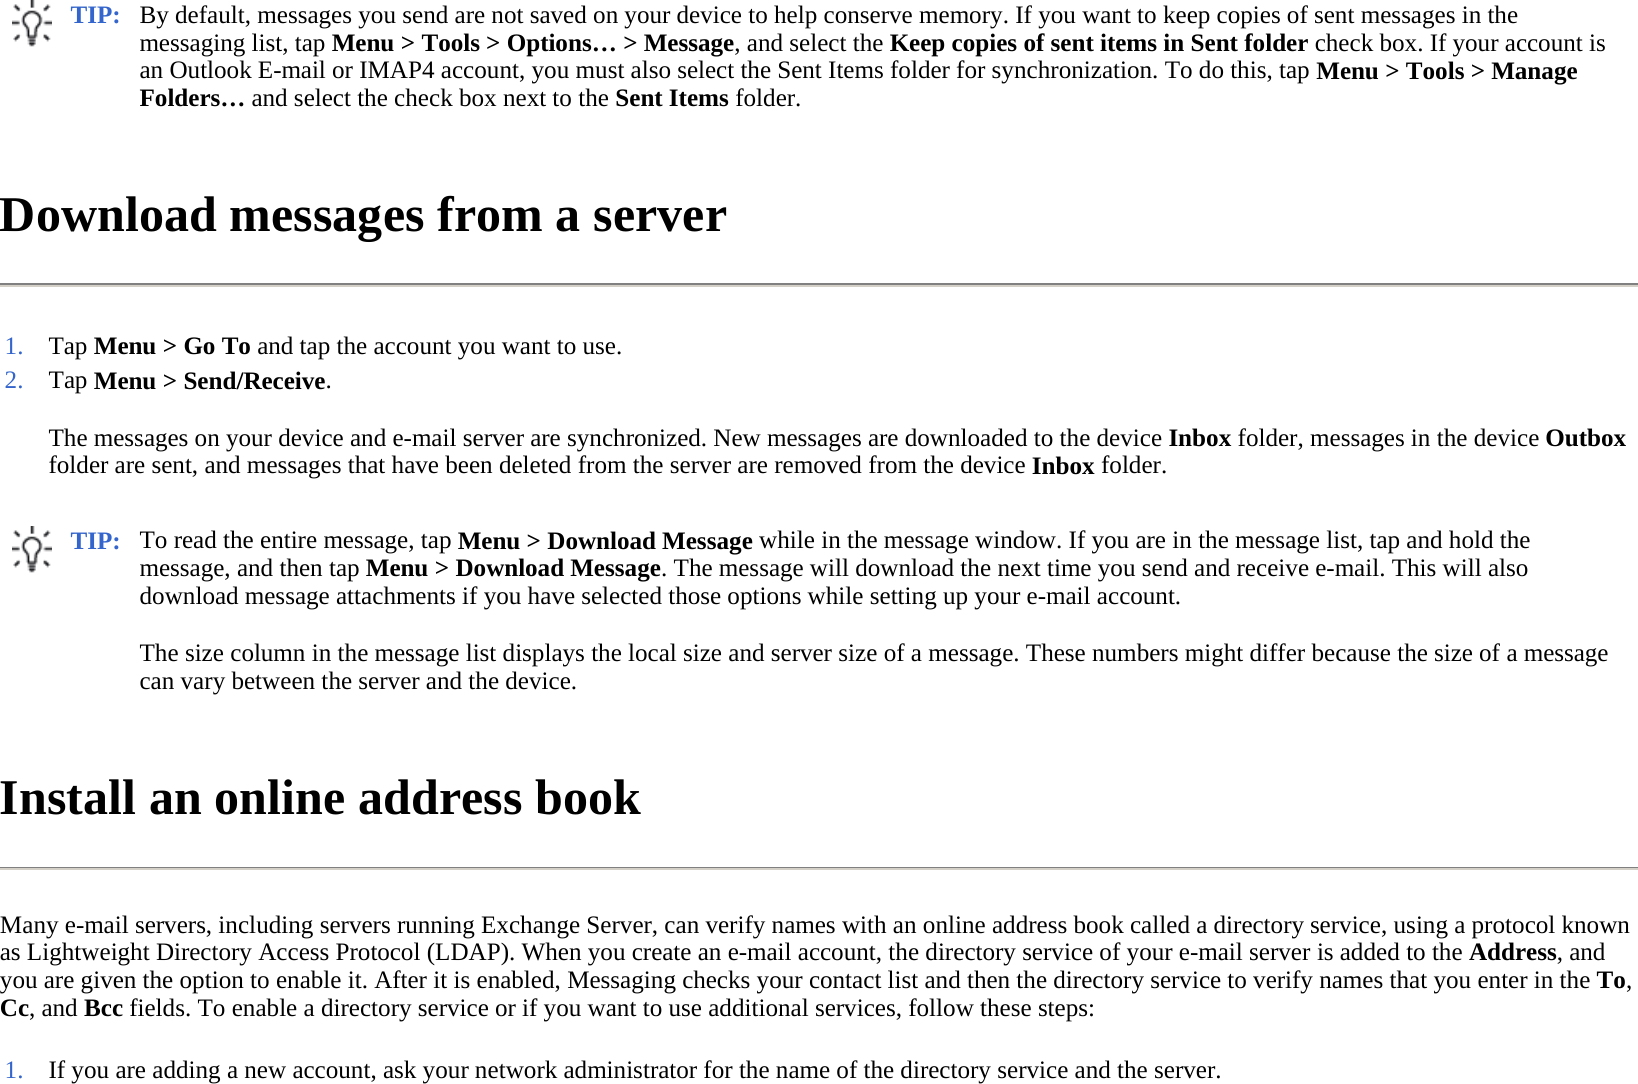 Download messages from a server  Install an online address book  Many e-mail servers, including servers running Exchange Server, can verify names with an online address book called a directory service, using a protocol known as Lightweight Directory Access Protocol (LDAP). When you create an e-mail account, the directory service of your e-mail server is added to the Address, and you are given the option to enable it. After it is enabled, Messaging checks your contact list and then the directory service to verify names that you enter in the To, Cc, and Bcc fields. To enable a directory service or if you want to use additional services, follow these steps:  TIP: By default, messages you send are not saved on your device to help conserve memory. If you want to keep copies of sent messages in the messaging list, tap Menu &gt; Tools &gt; Options… &gt; Message, and select the Keep copies of sent items in Sent folder check box. If your account is an Outlook E-mail or IMAP4 account, you must also select the Sent Items folder for synchronization. To do this, tap Menu &gt; Tools &gt; Manage Folders… and select the check box next to the Sent Items folder.  1. Tap Menu &gt; Go To and tap the account you want to use.2.The messages on your device and e-mail server are synchronized. New messages are downloaded to the device Inbox folder, messages in the device Outbox folder are sent, and messages that have been deleted from the server are removed from the device Inbox folder.  Tap Menu &gt; Send/Receive. TIP: To read the entire message, tap Menu &gt; Download Message while in the message window. If you are in the message list, tap and hold the message, and then tap Menu &gt; Download Message. The message will download the next time you send and receive e-mail. This will also download message attachments if you have selected those options while setting up your e-mail account.  The size column in the message list displays the local size and server size of a message. These numbers might differ because the size of a message can vary between the server and the device.  1. If you are adding a new account, ask your network administrator for the name of the directory service and the server.